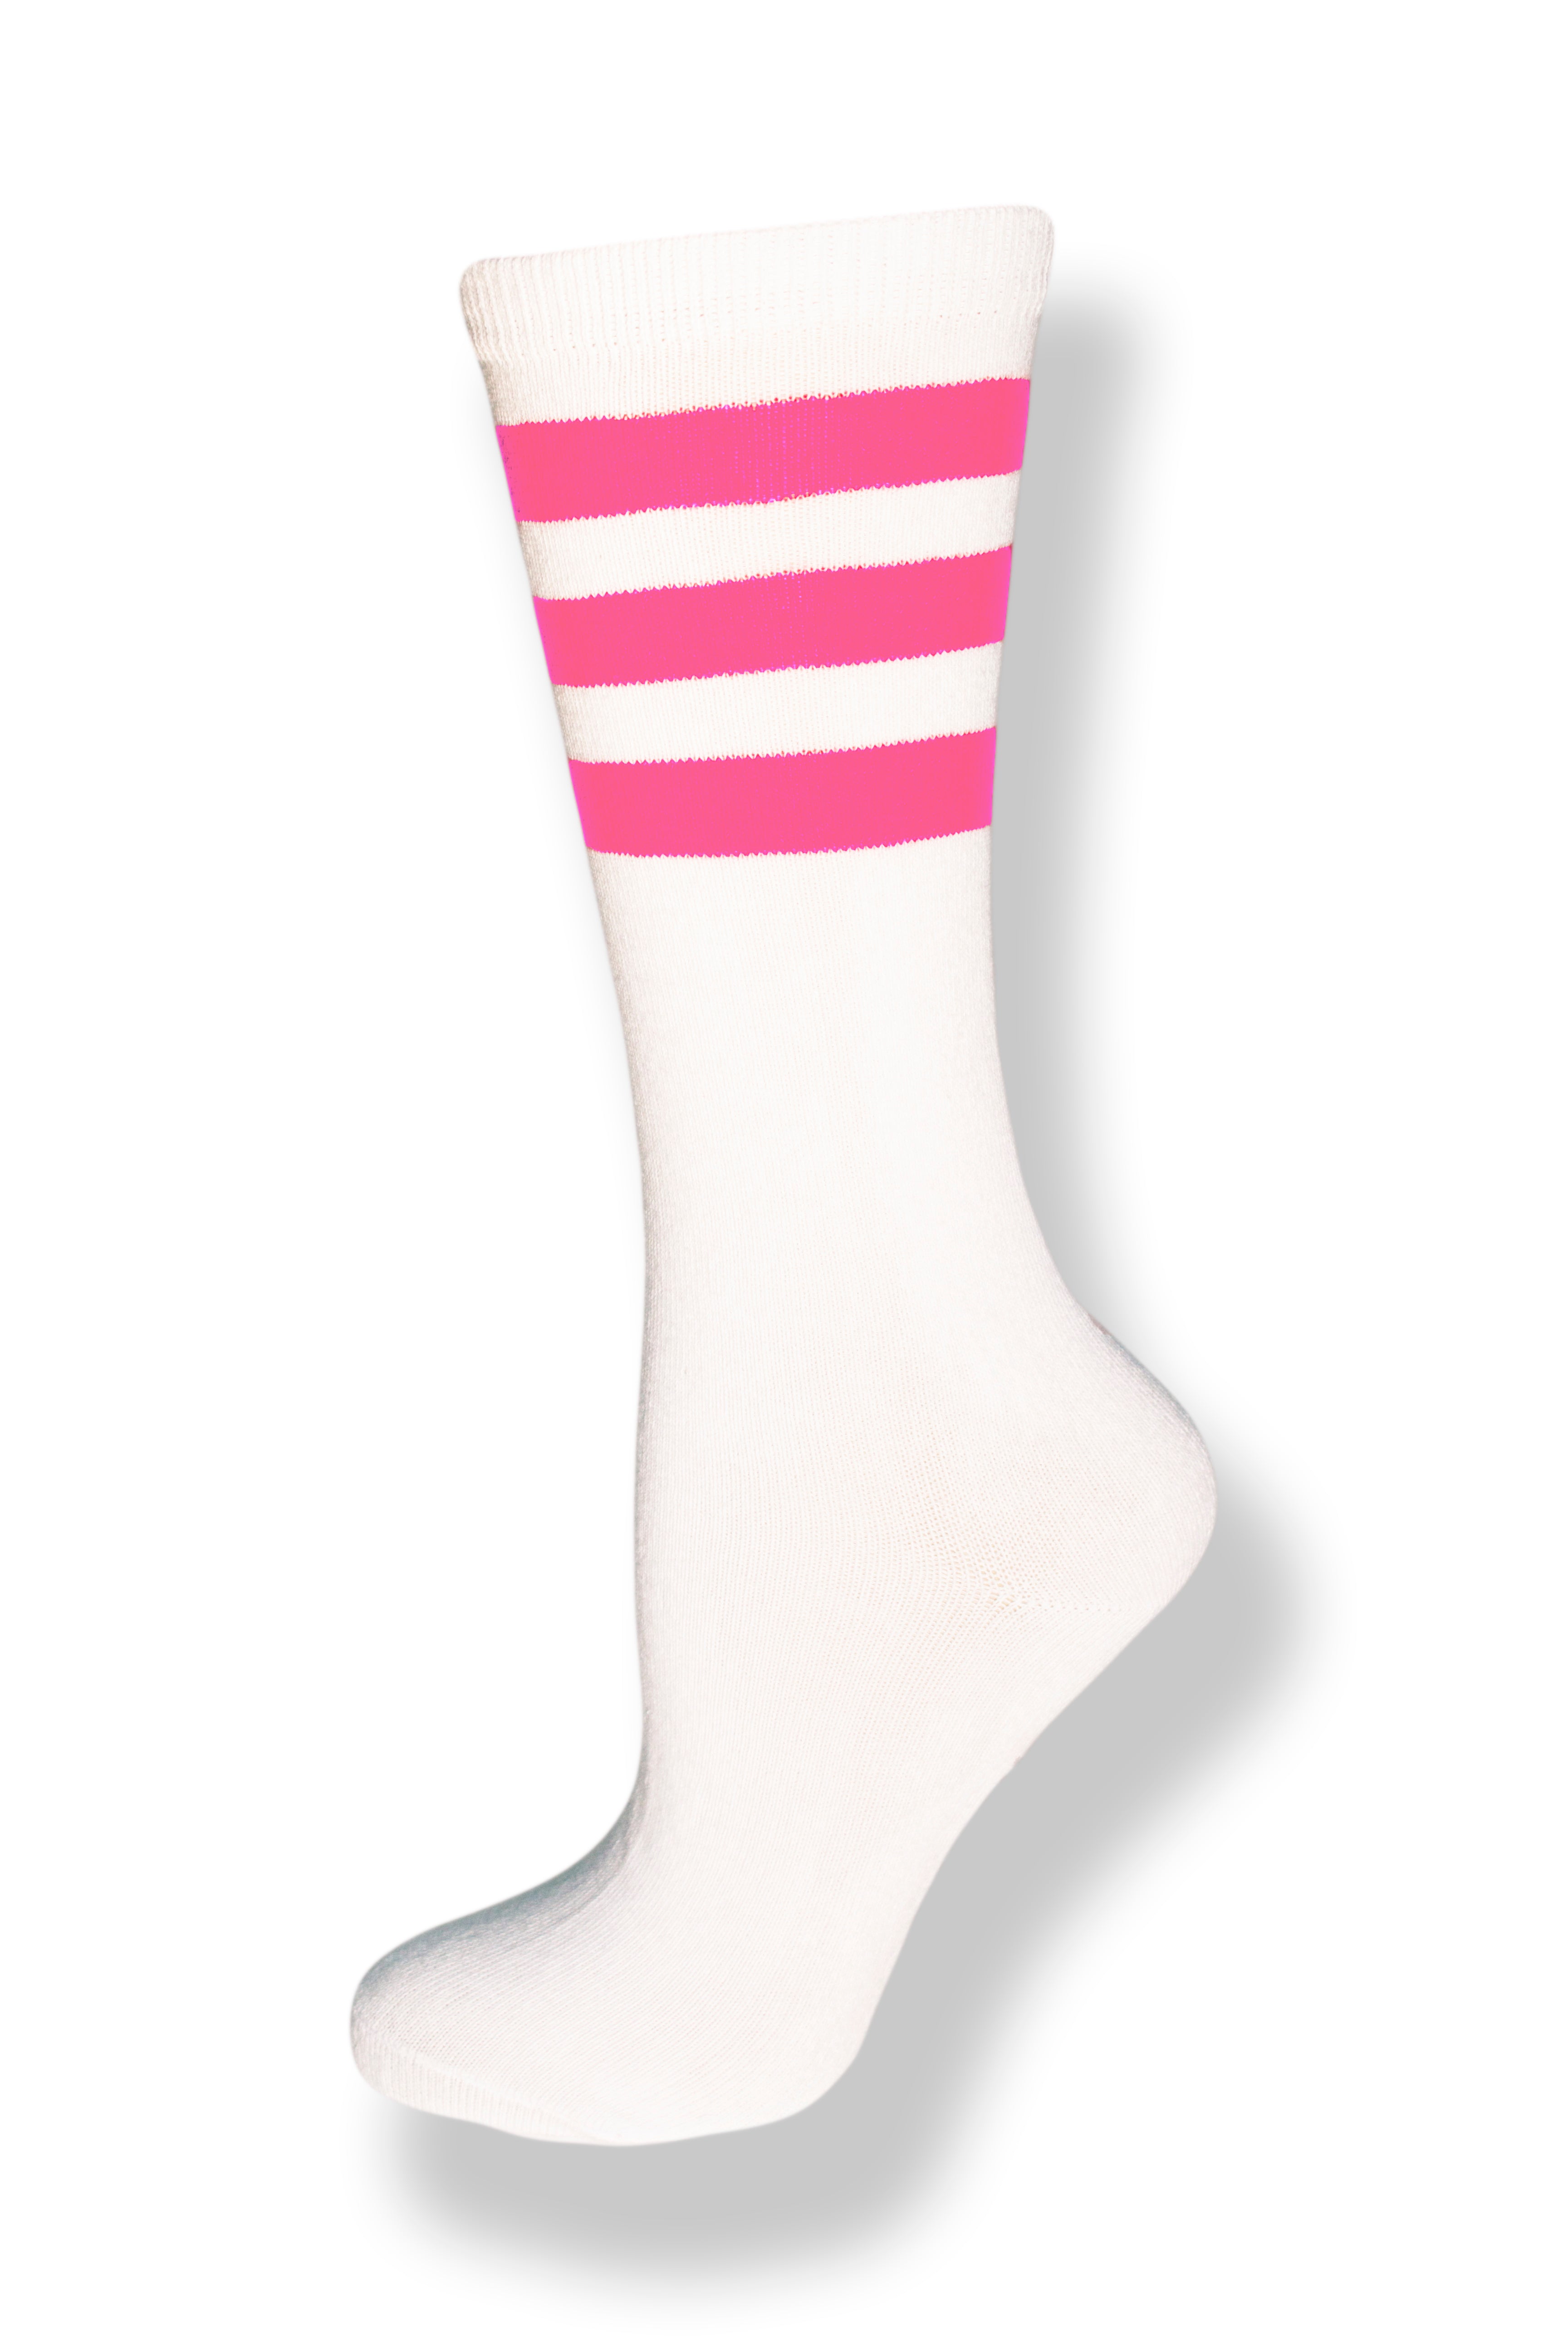 Unisex Mid Calf High White Sock with Pink Stripes